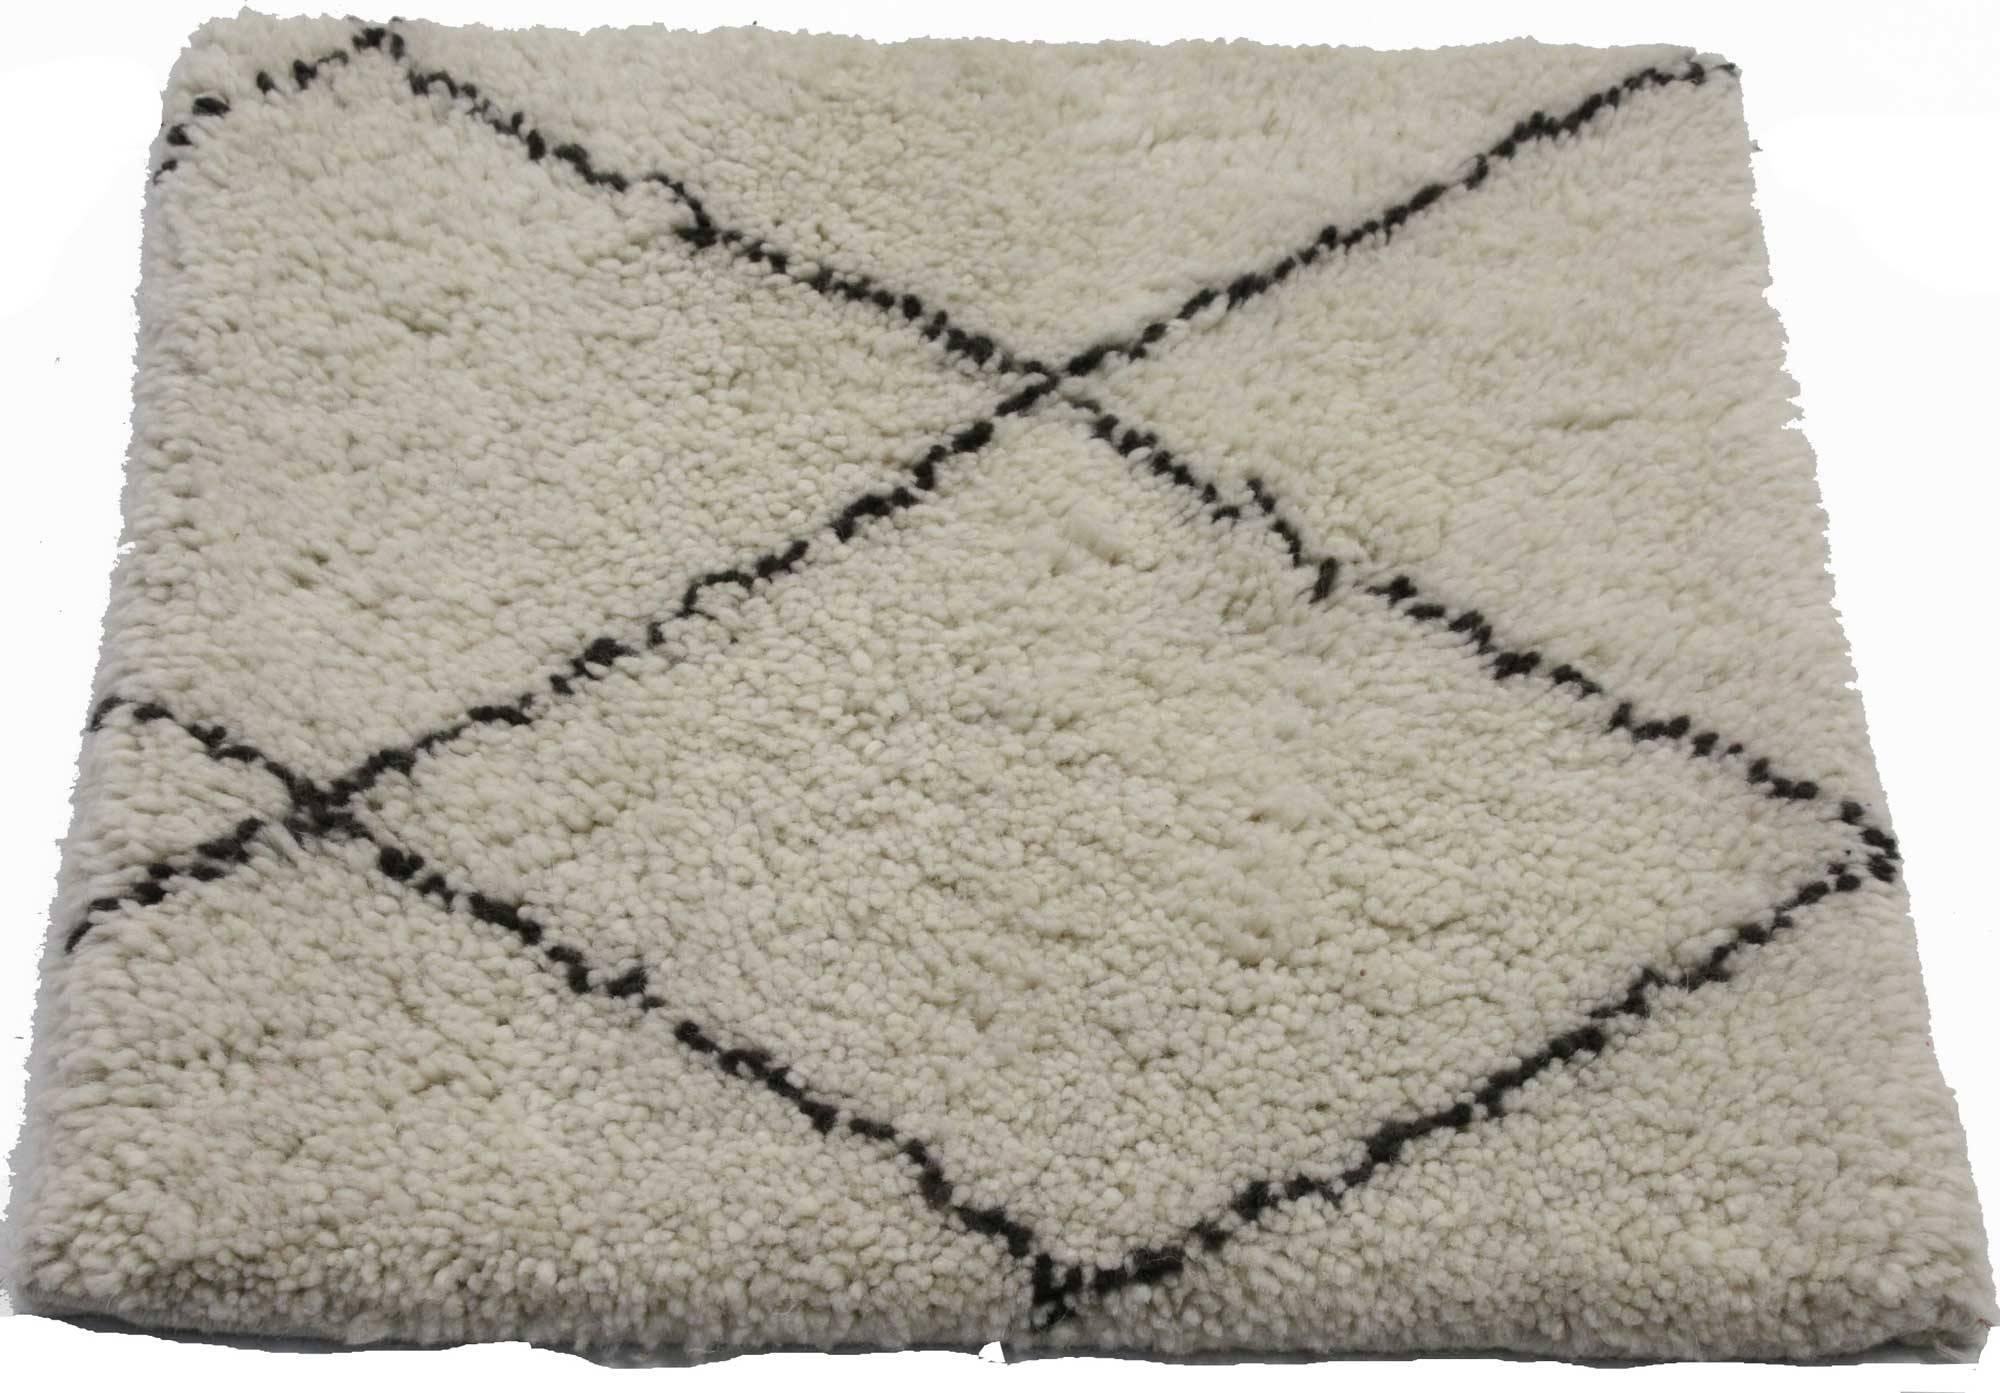 76721, Moroccan style Accent rug with Modern Bauhaus Design. This Moroccan style accent rug with modern Bauhaus design features an ivory background with dark brown lines. Polished and playful, this Moroccan style rug combines simplicity with modern